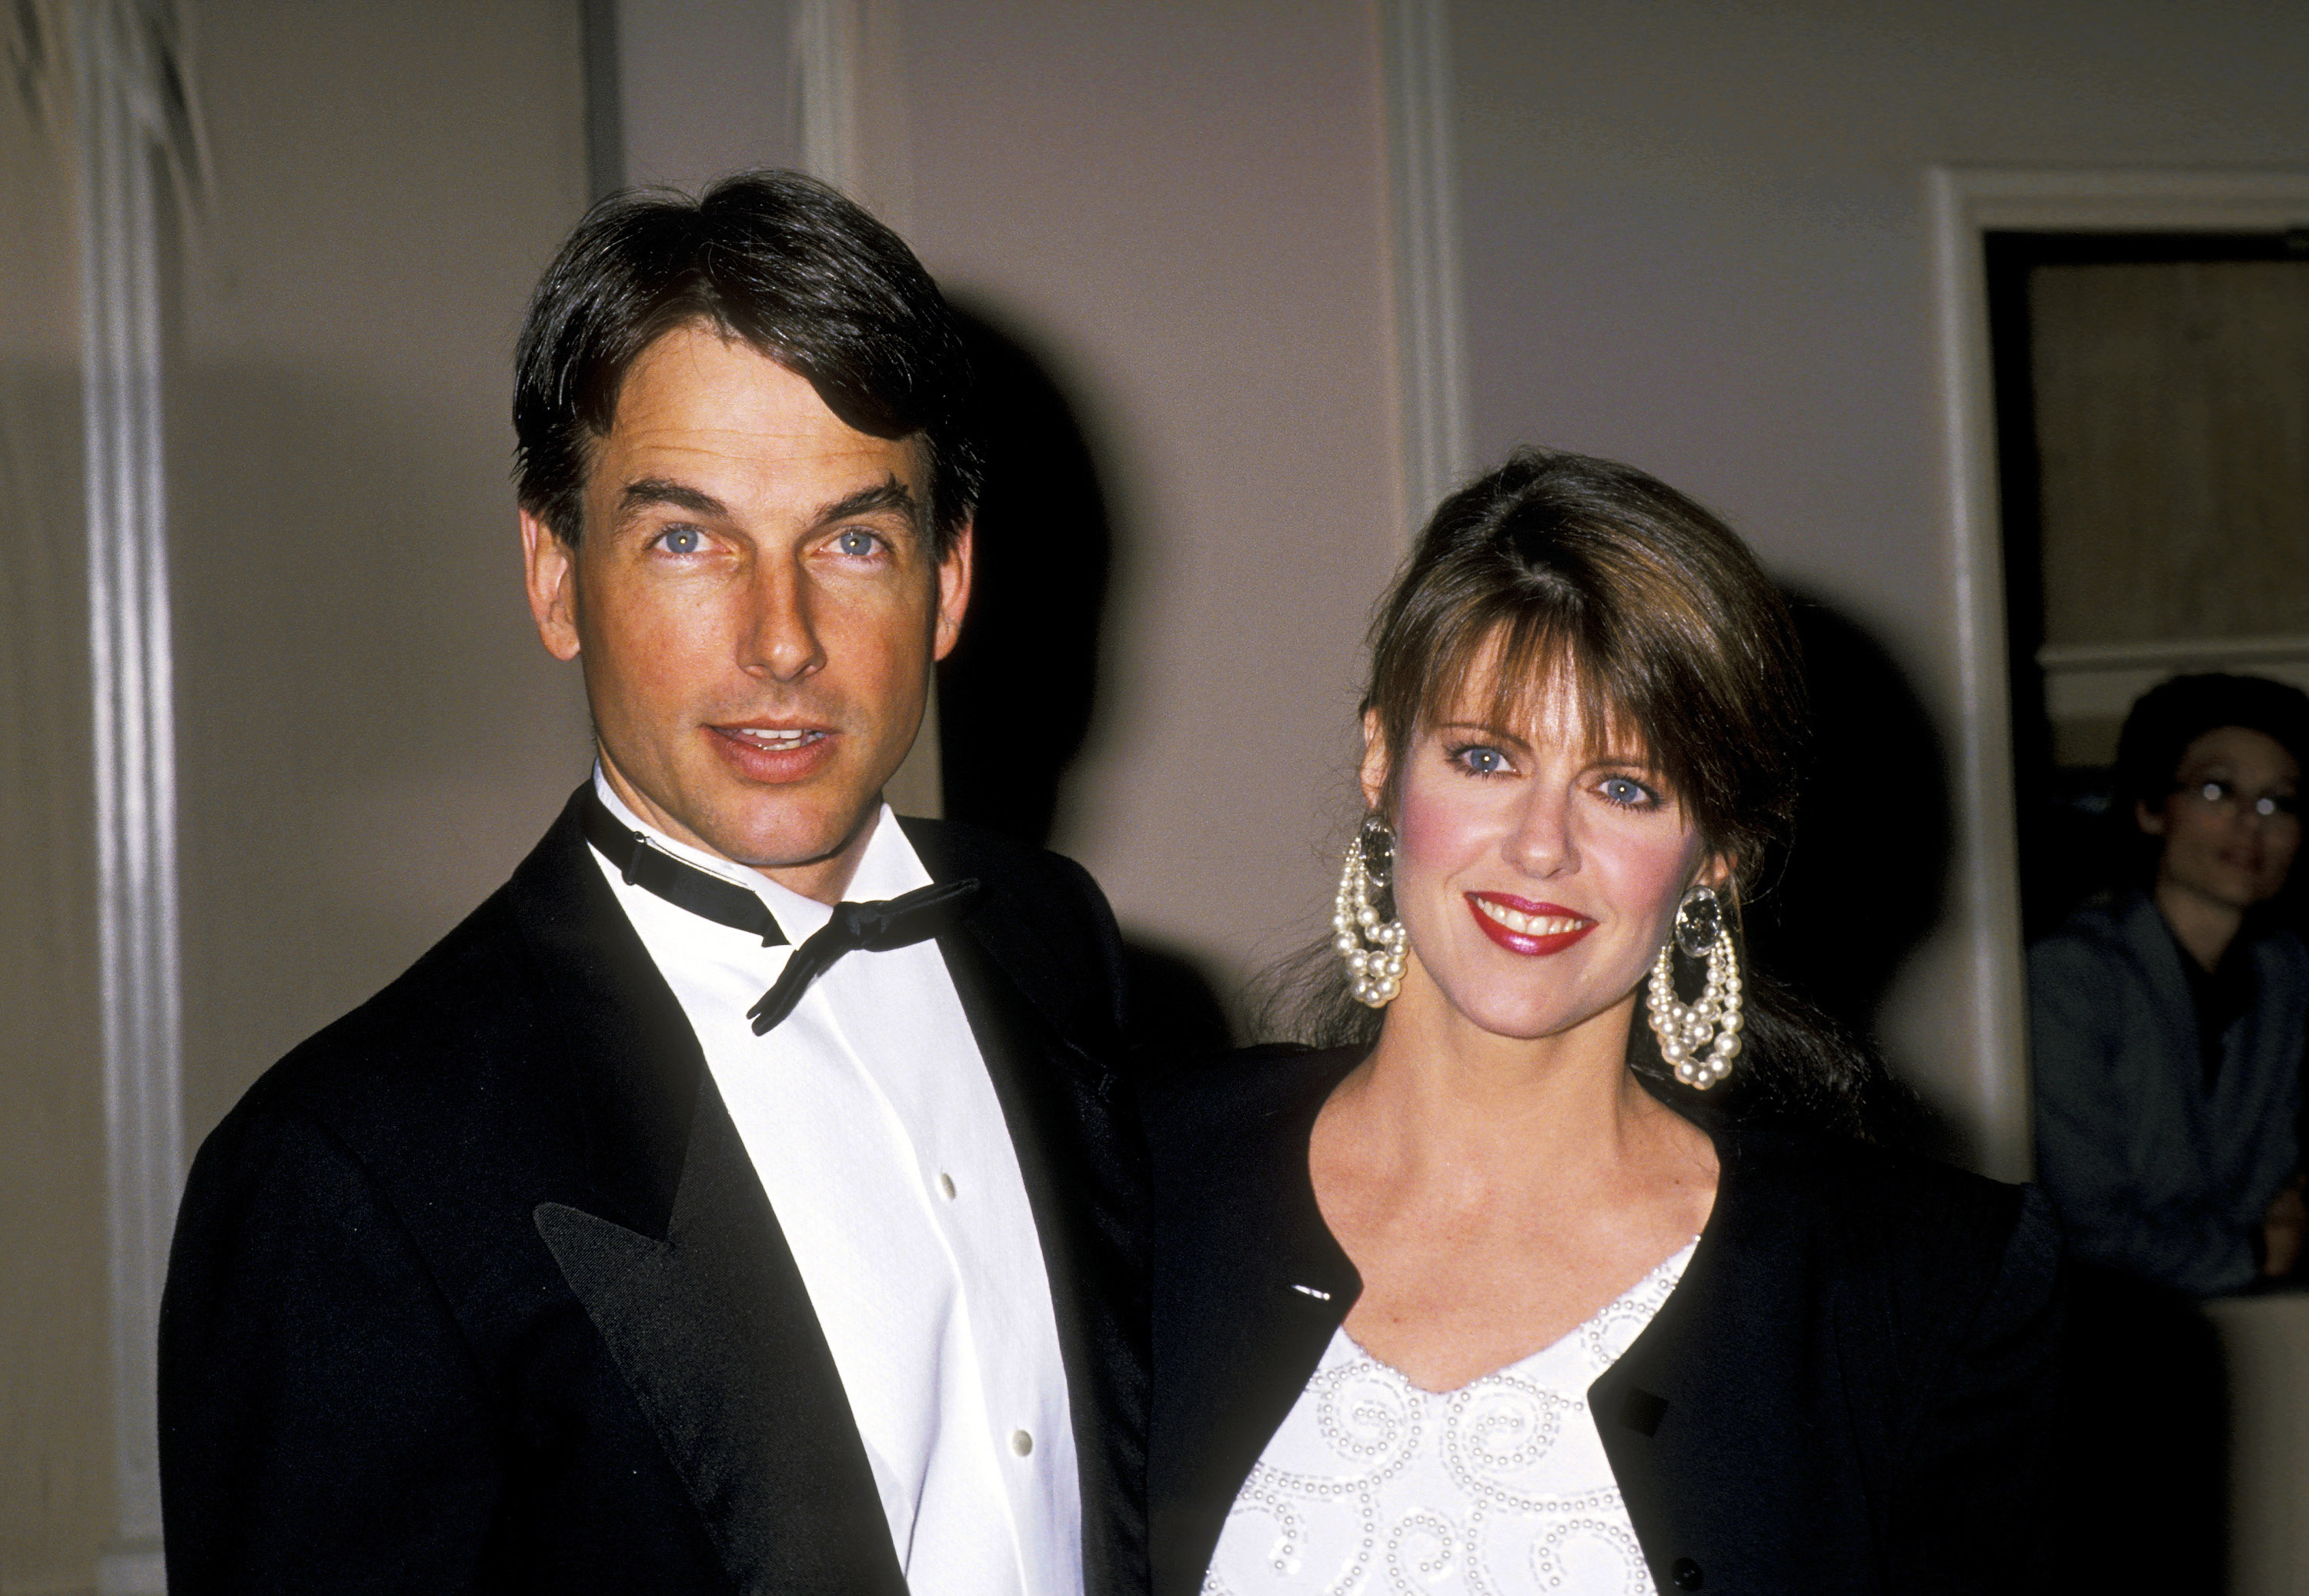 Mark Harmon and Pam Dawber on March 9 1989 | Source: Getty Images